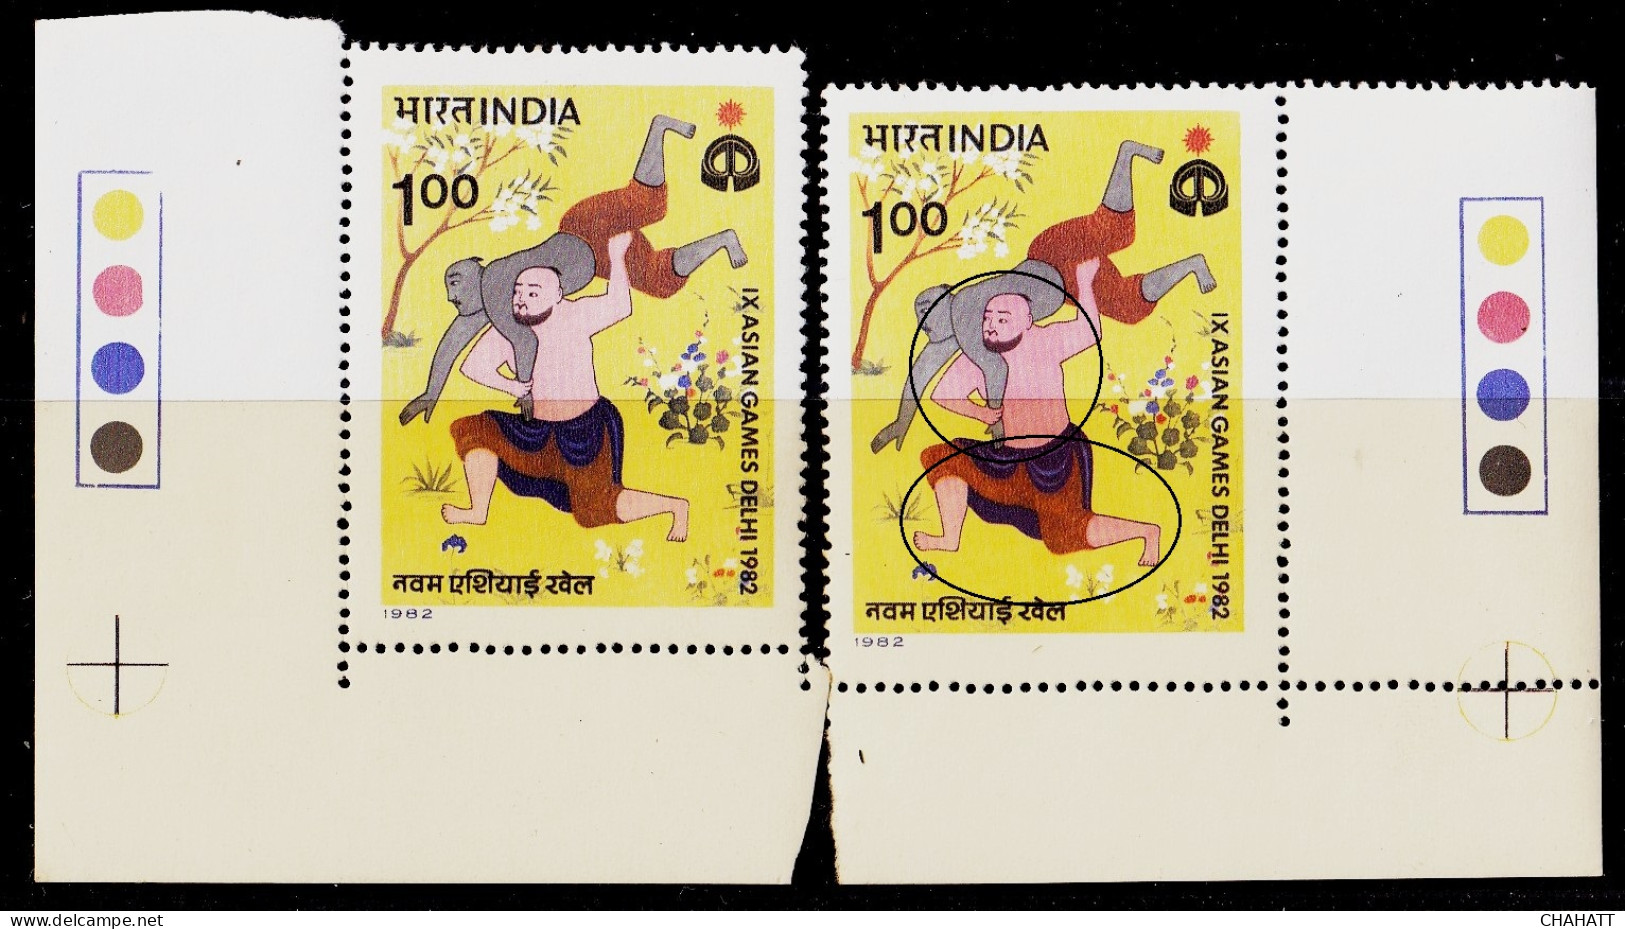 INDIA-1982- WRESTLING- COLOR VARIETY-2x CORNER VALUES WITH TRAFFIC LIGHTS-ERROR - MNH- IE-64 - Errors, Freaks & Oddities (EFO)